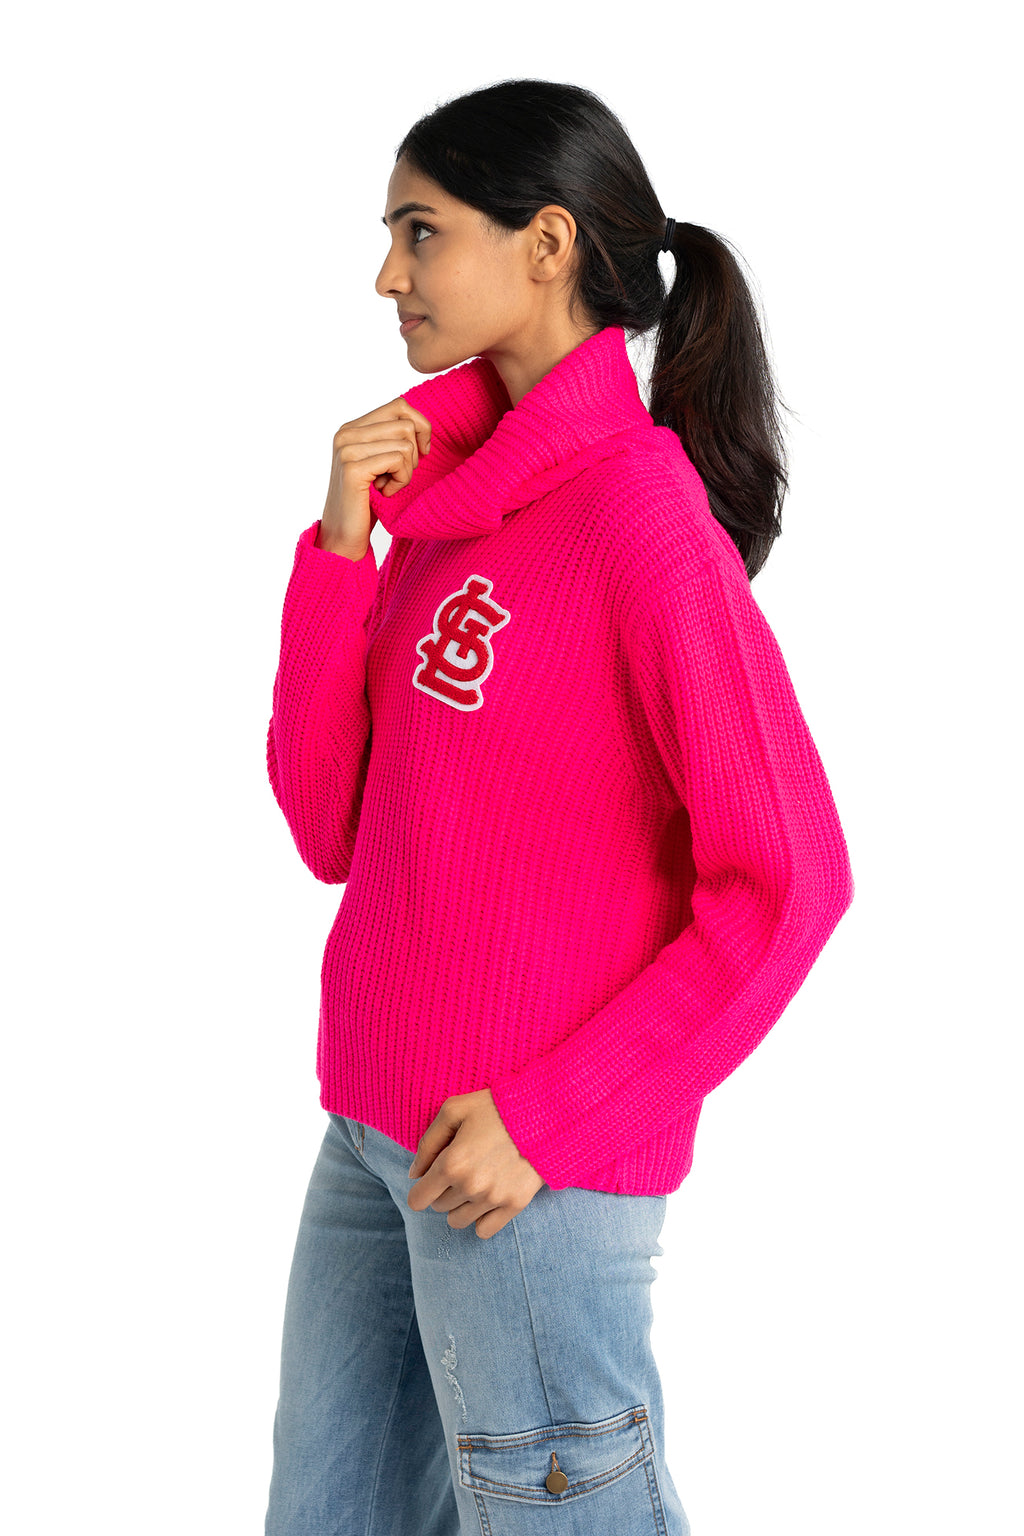 Knit Pull Over Sweater - St Louis Cardinals